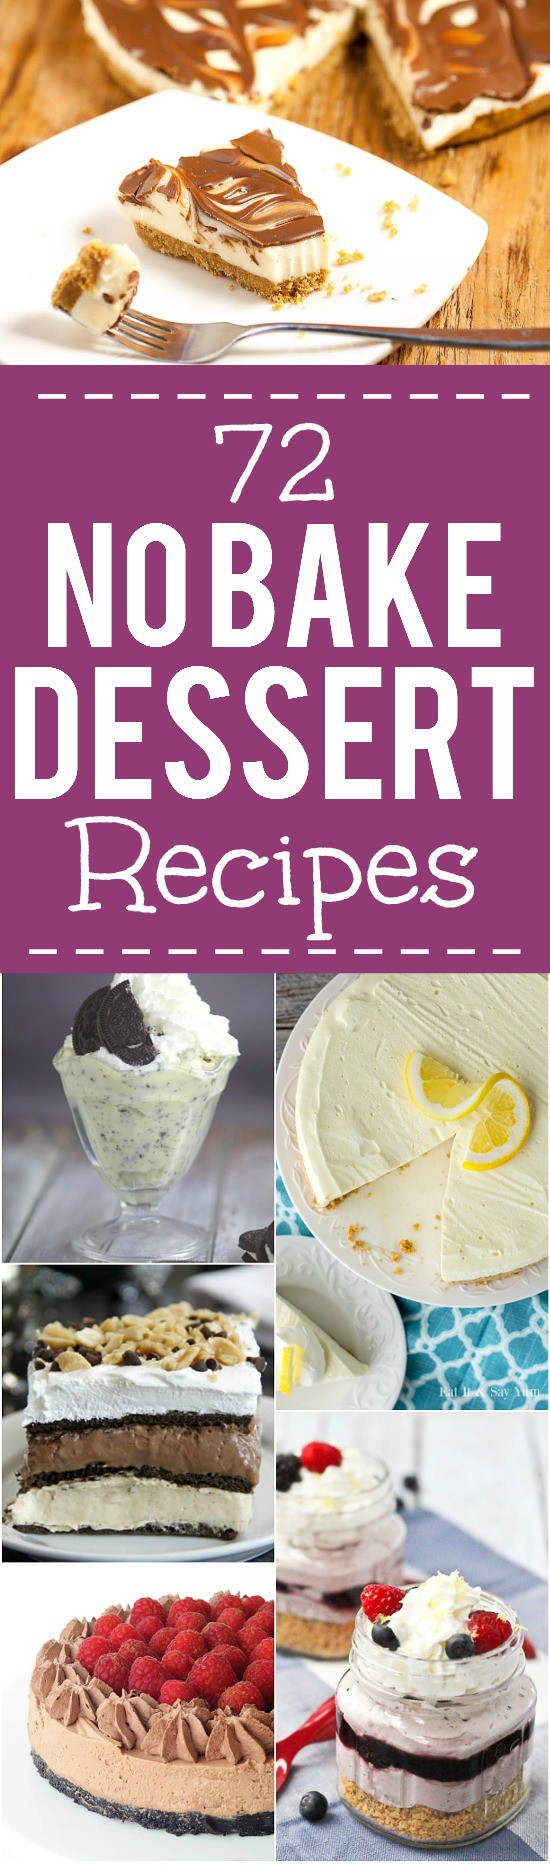 72 No Bake Dessert Recipes perfect for an easy Summer dessert or a quick and easy dessert recipe any time. Satisfy your sweet tooth without the oven with these 72 quick, easy, and scrumptious No Bake Dessert recipes that everyone will love.  Yes! Dessert made easy!